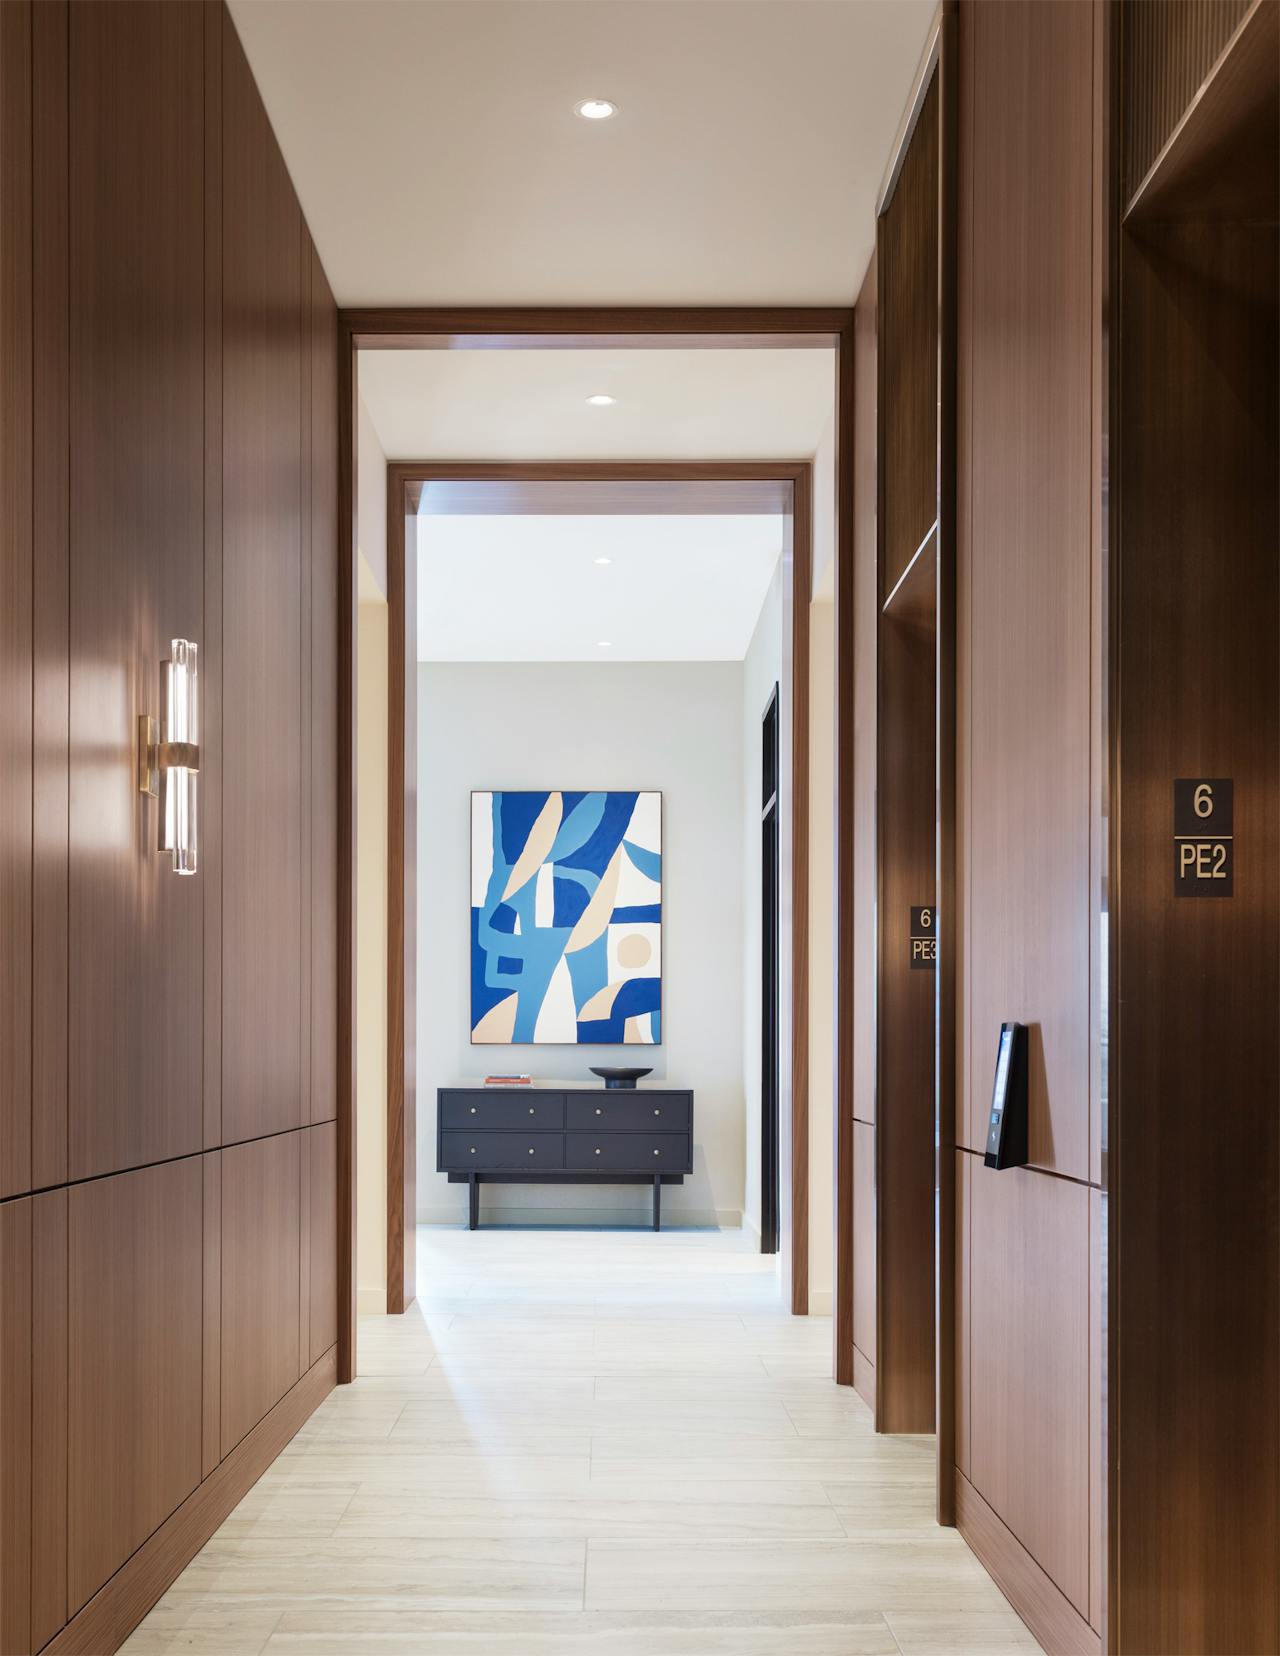 The Row Chicago Related Midwest Hallway Interior Design MAWD Residential Hospitality